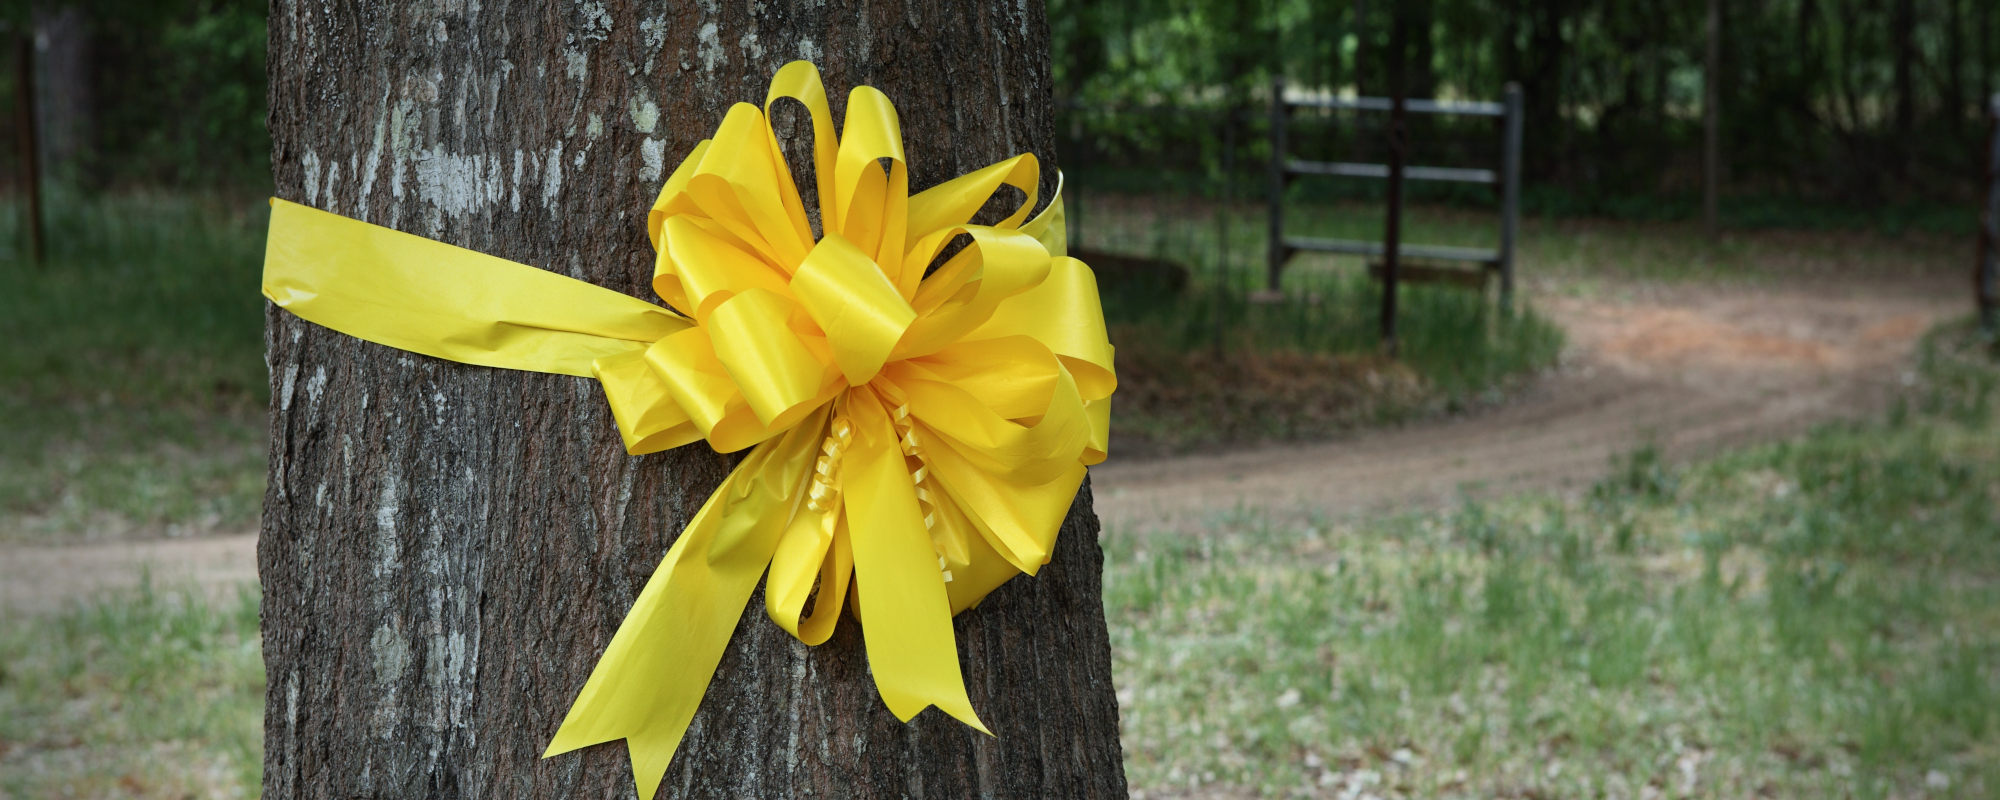 50 Years Later, The Meaning Behind “Tie a Yellow Ribbon Round the Ole Oak Tree”